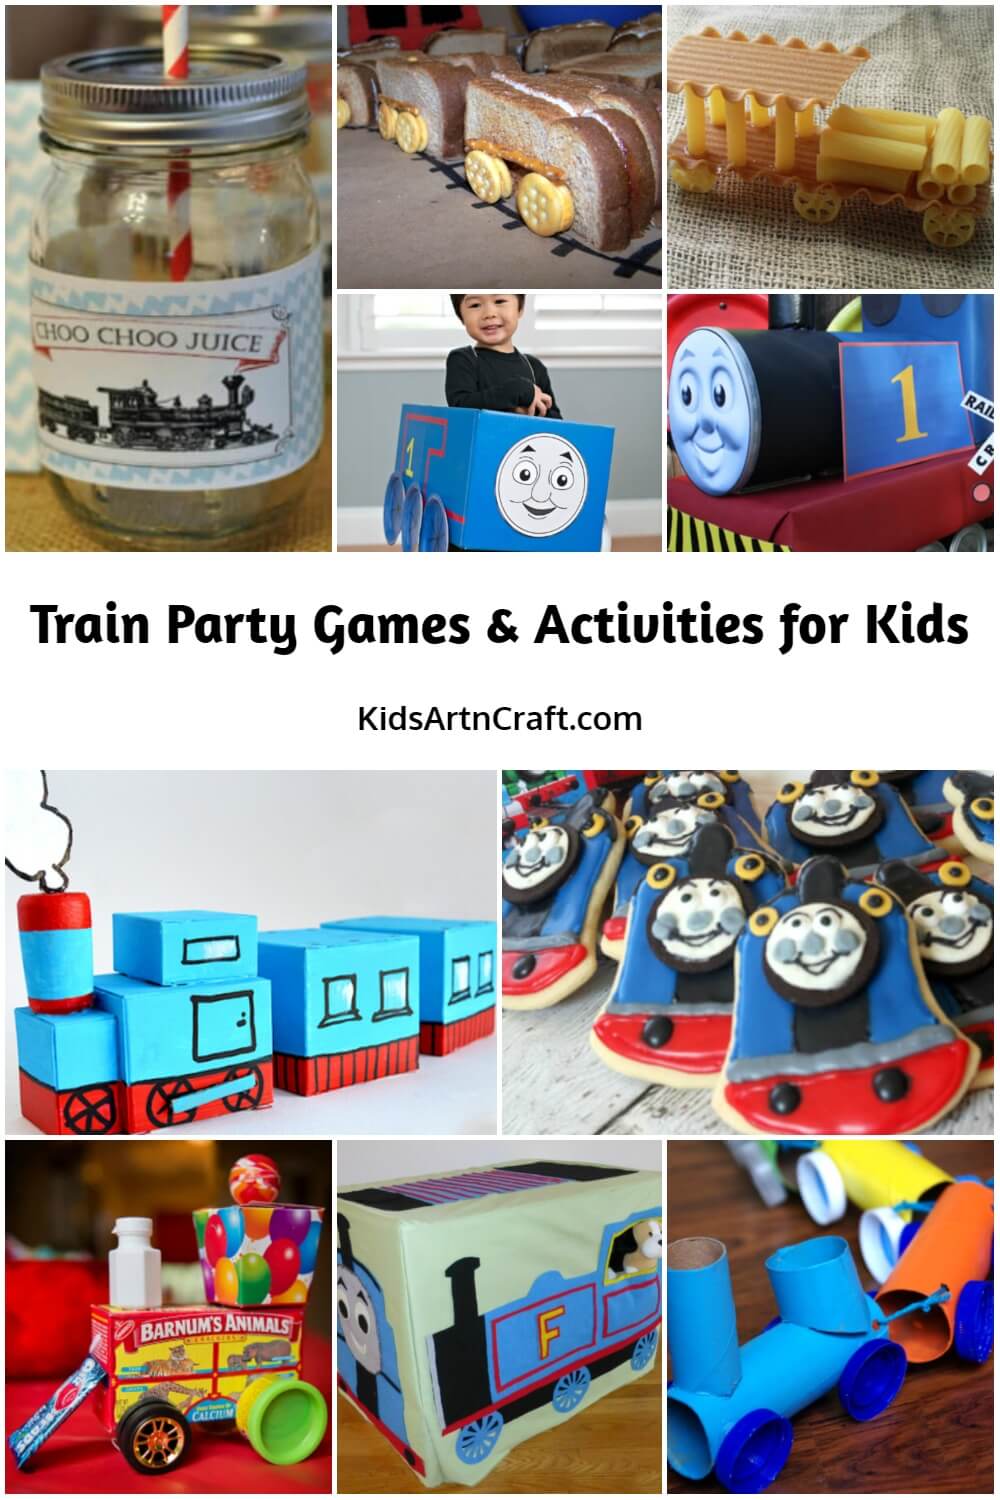 Train Party Games & Activities for Kids